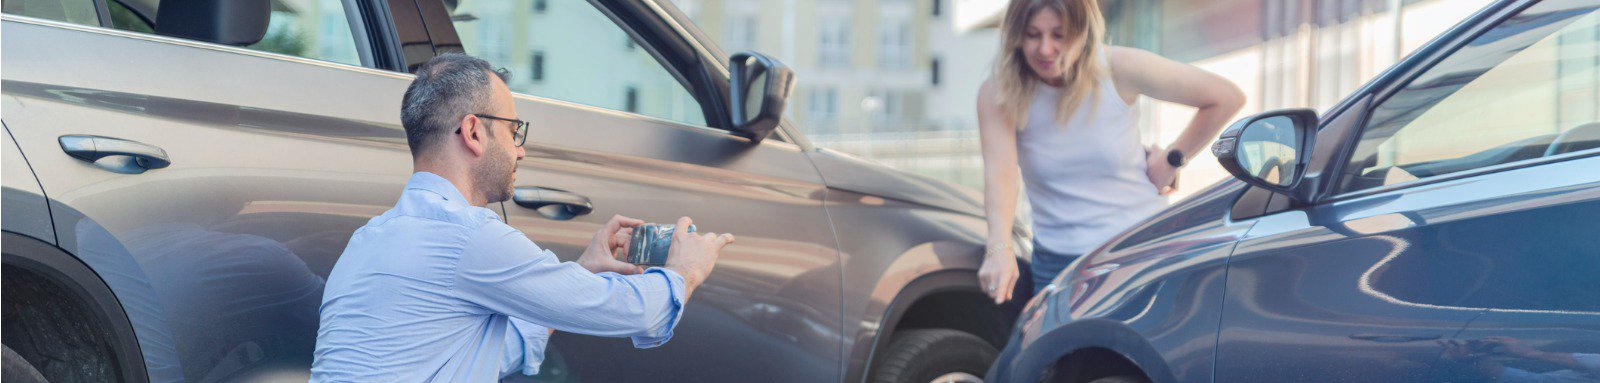 Two people photographing a car with a smartphone post accident